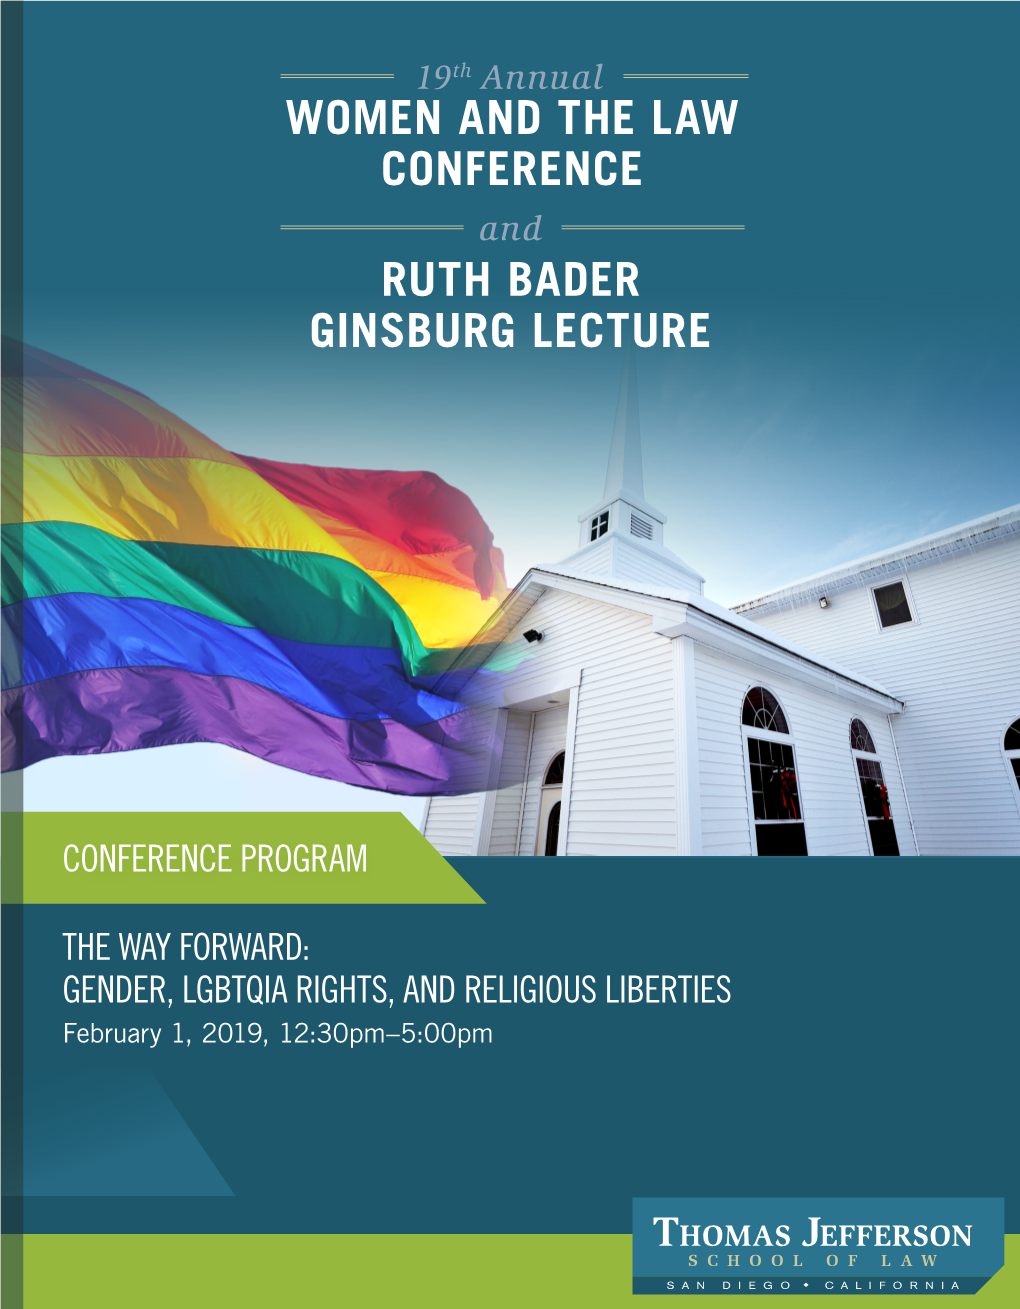 Ruth Bader Ginsburg Lecture Women and the Law Conference